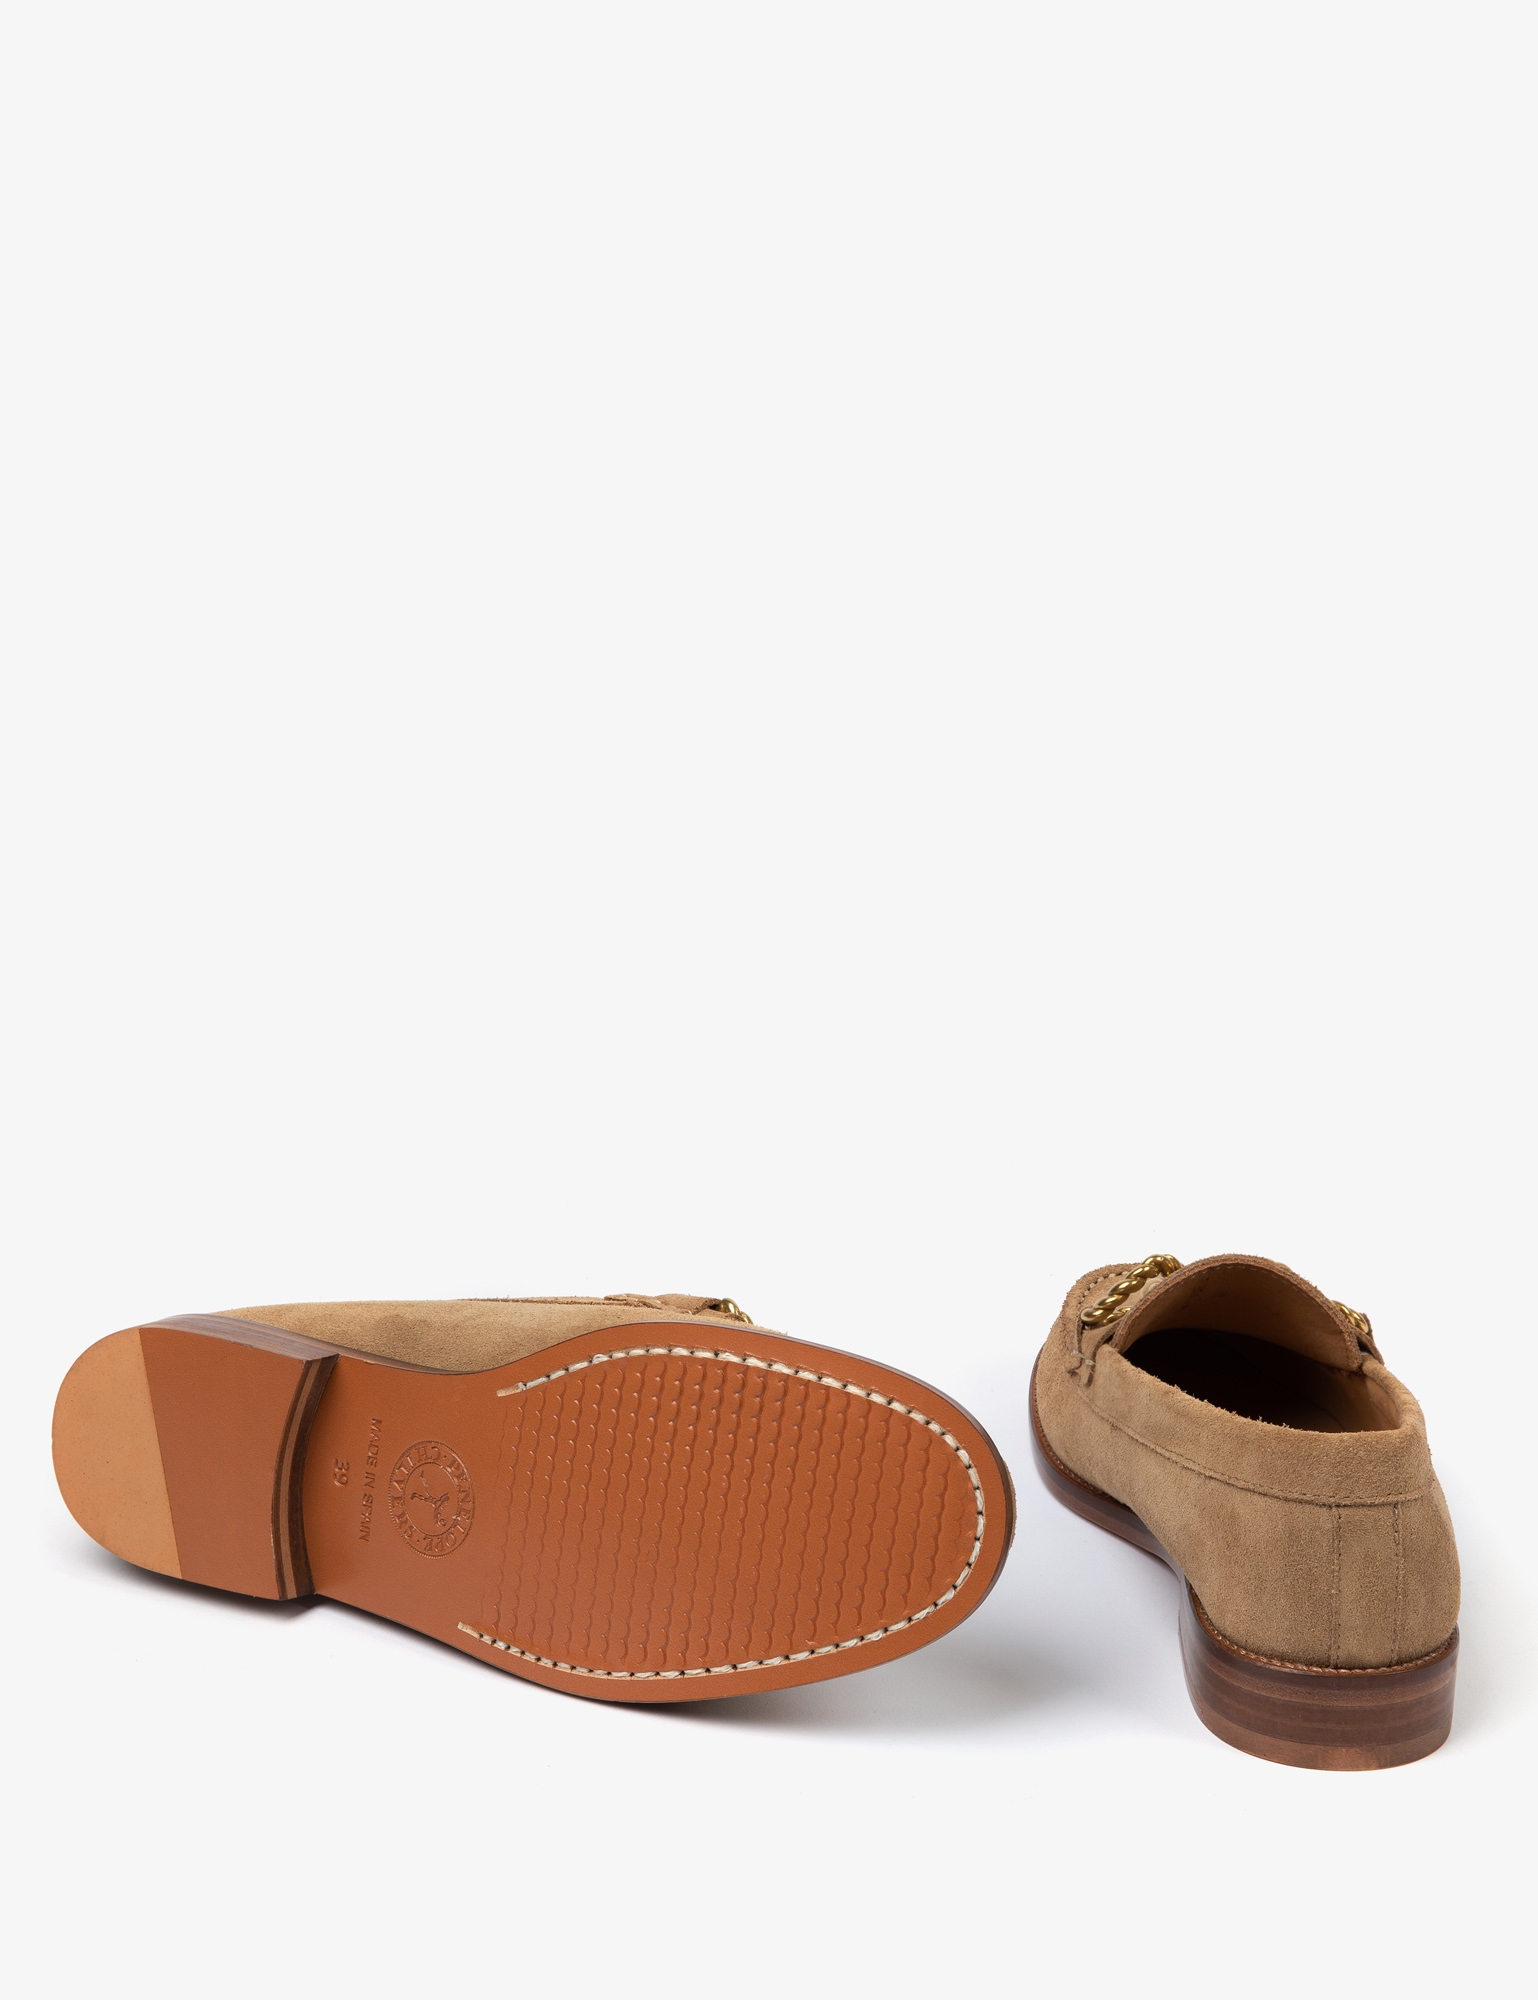 Braided Barley Suede Loafer - Camel| Women Shoes | Penelope Chilvers